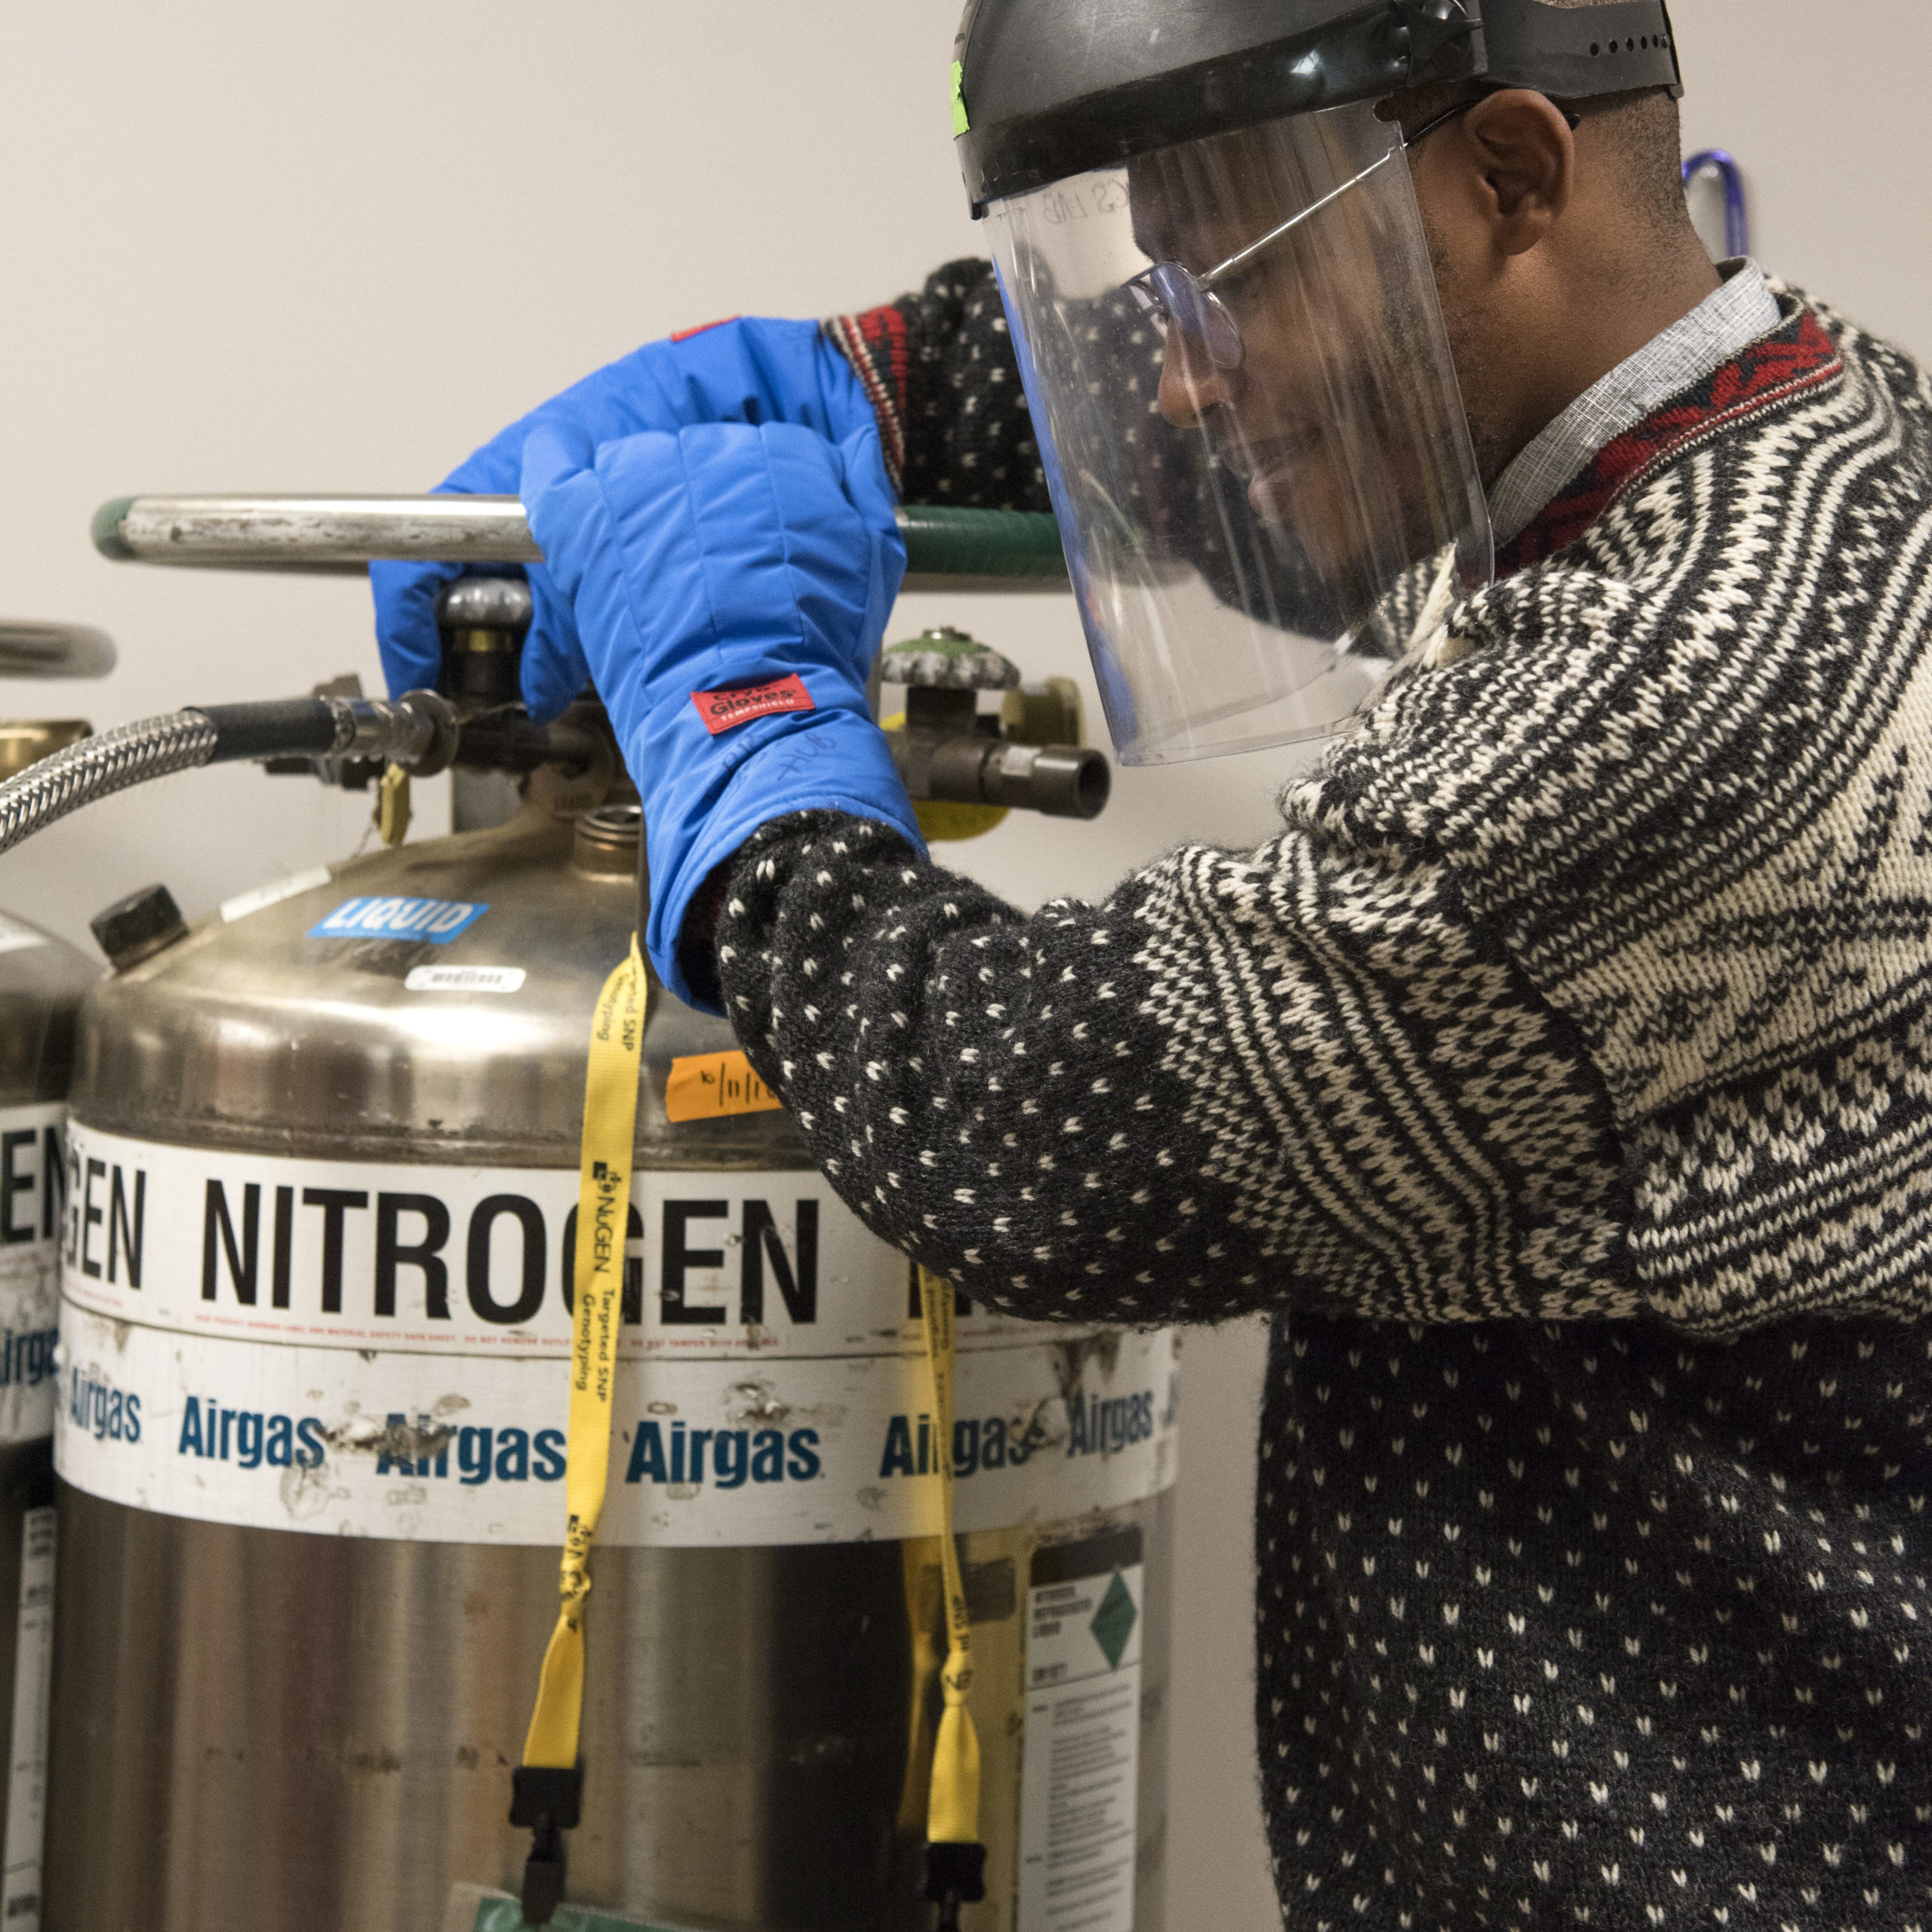 Student adjusts Nitrogen tank in face shield and gloves 